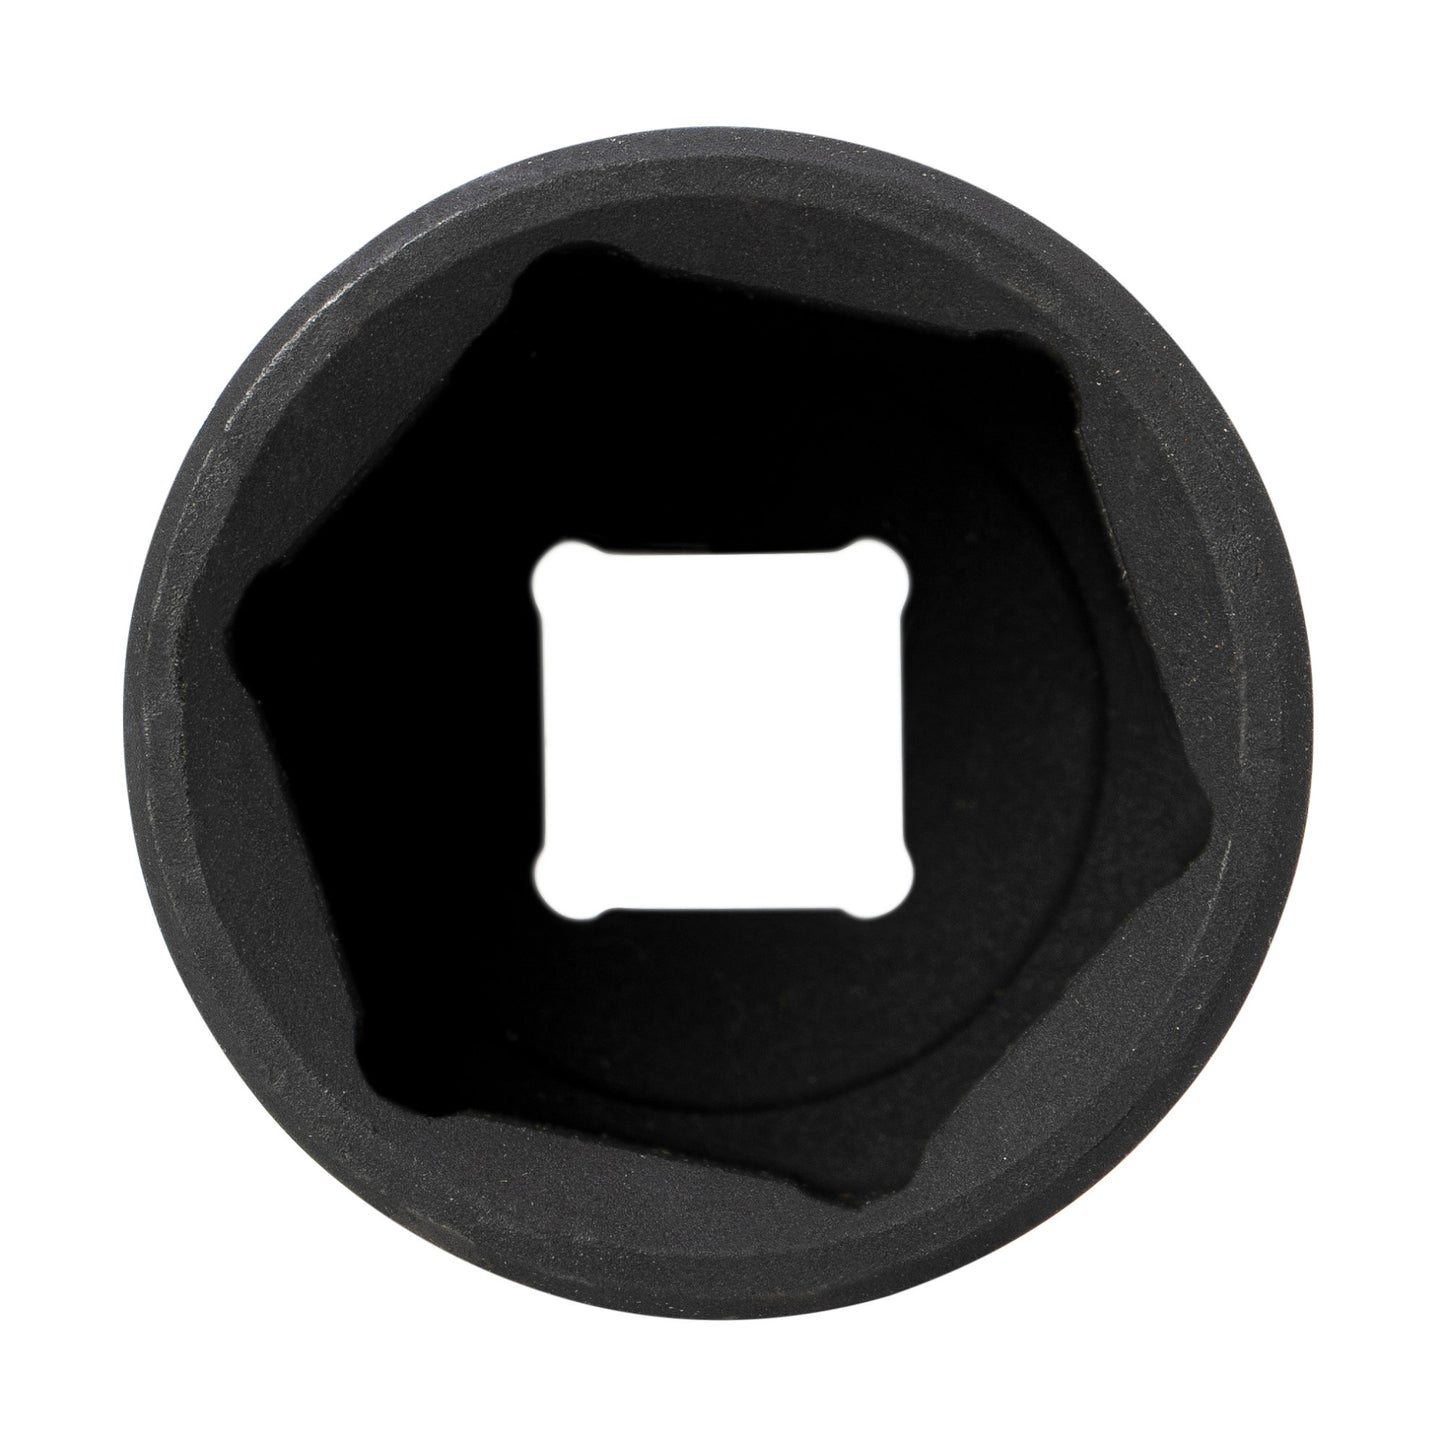 1/2-inch Drive x 1-3/16-inch Shallow 6-Point Impact SAE Socket